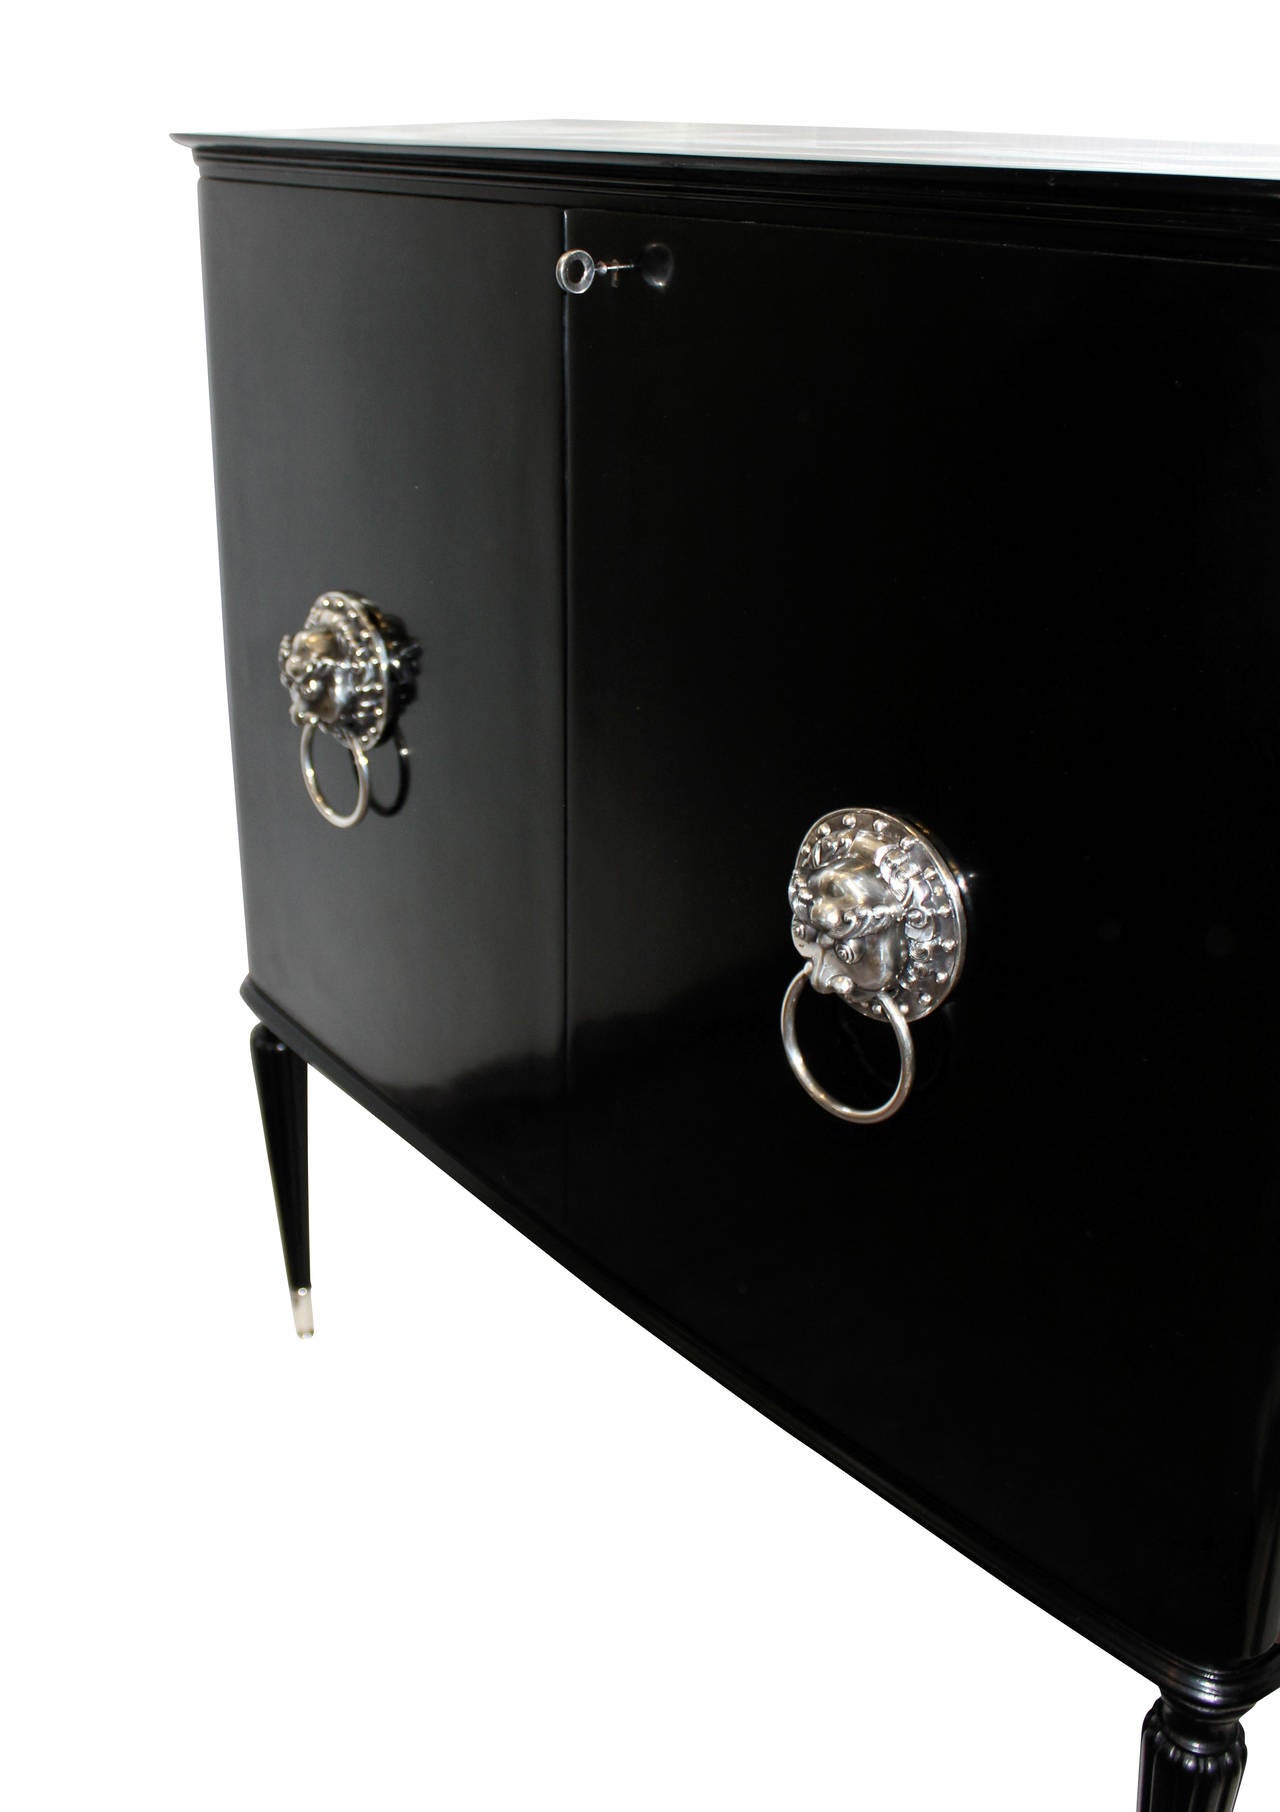 An Italian black lacquered bar cabinet of unusual design. Comprising a fitted interior with drawers and shelves, fine tapering fluted legs with silver sabot and each door has a silver Oriental mask feature.